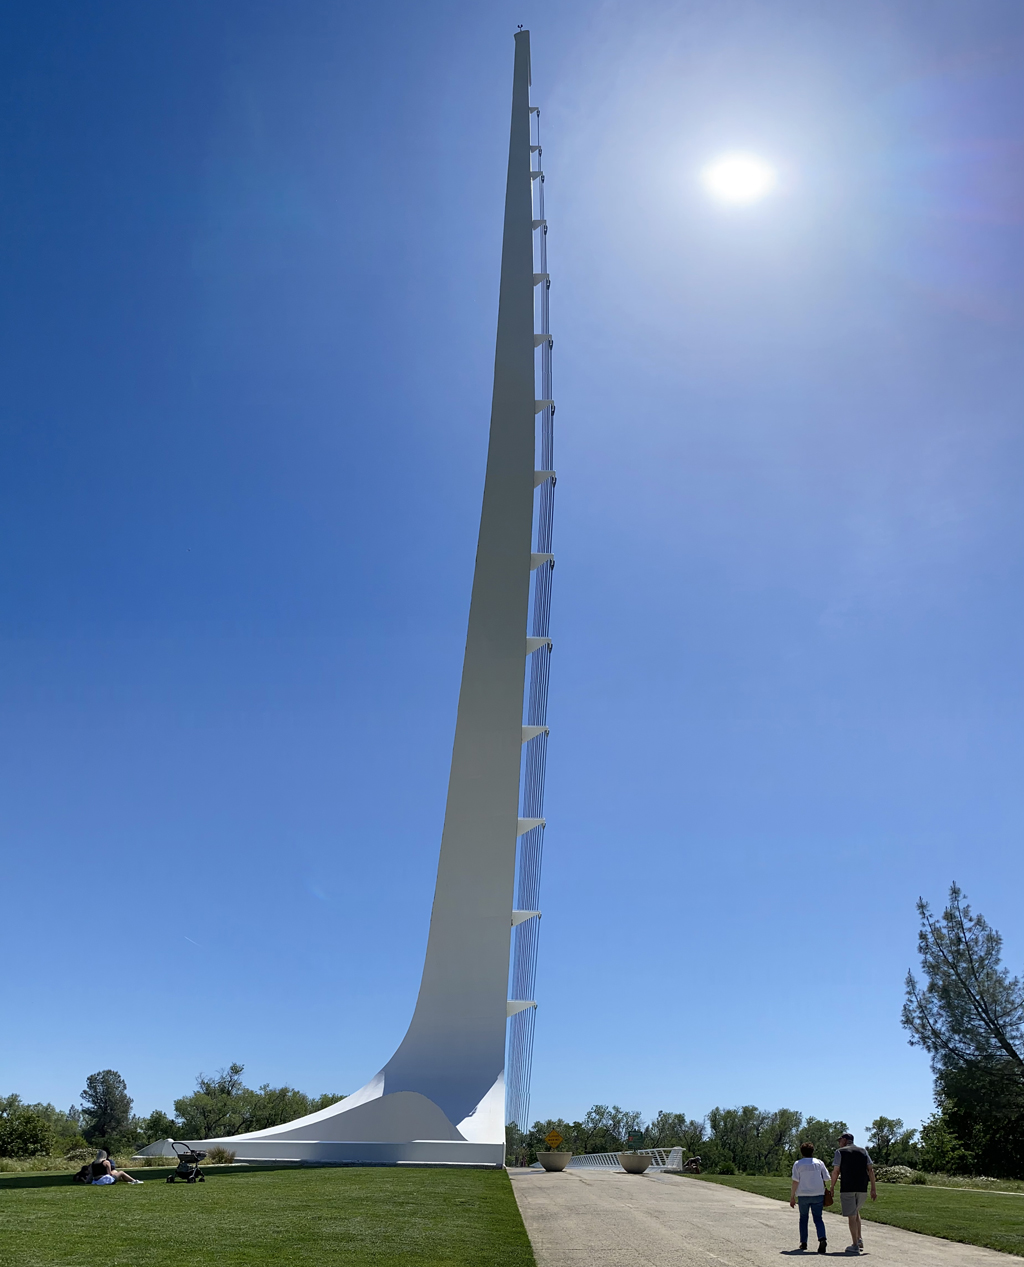 Gratuitous shot of the Sundial bridge from the other end, just because. Photo: Melanie Curry/Streetsblog